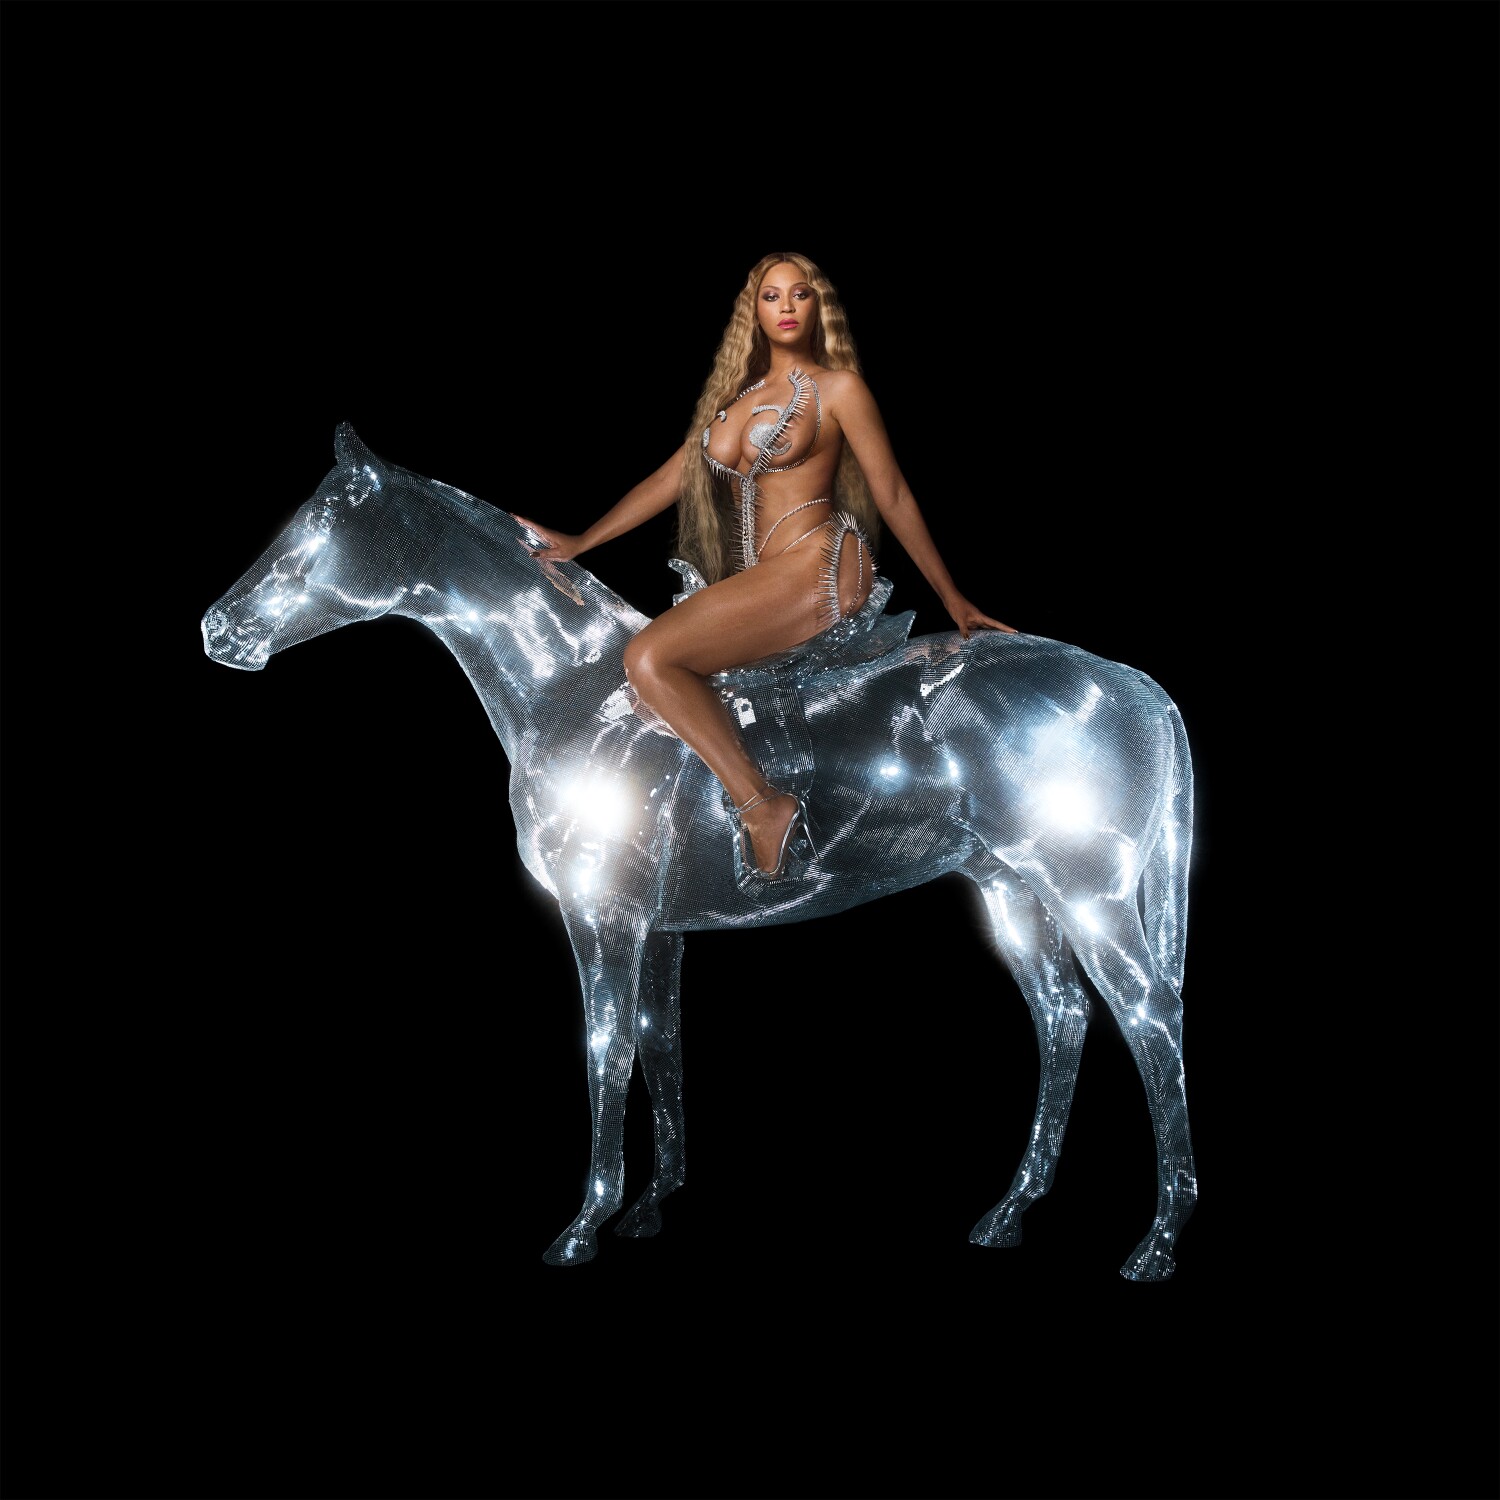 Beyoncé's 'Renaissance' album cover is here. Saddle up and bow down to the queen